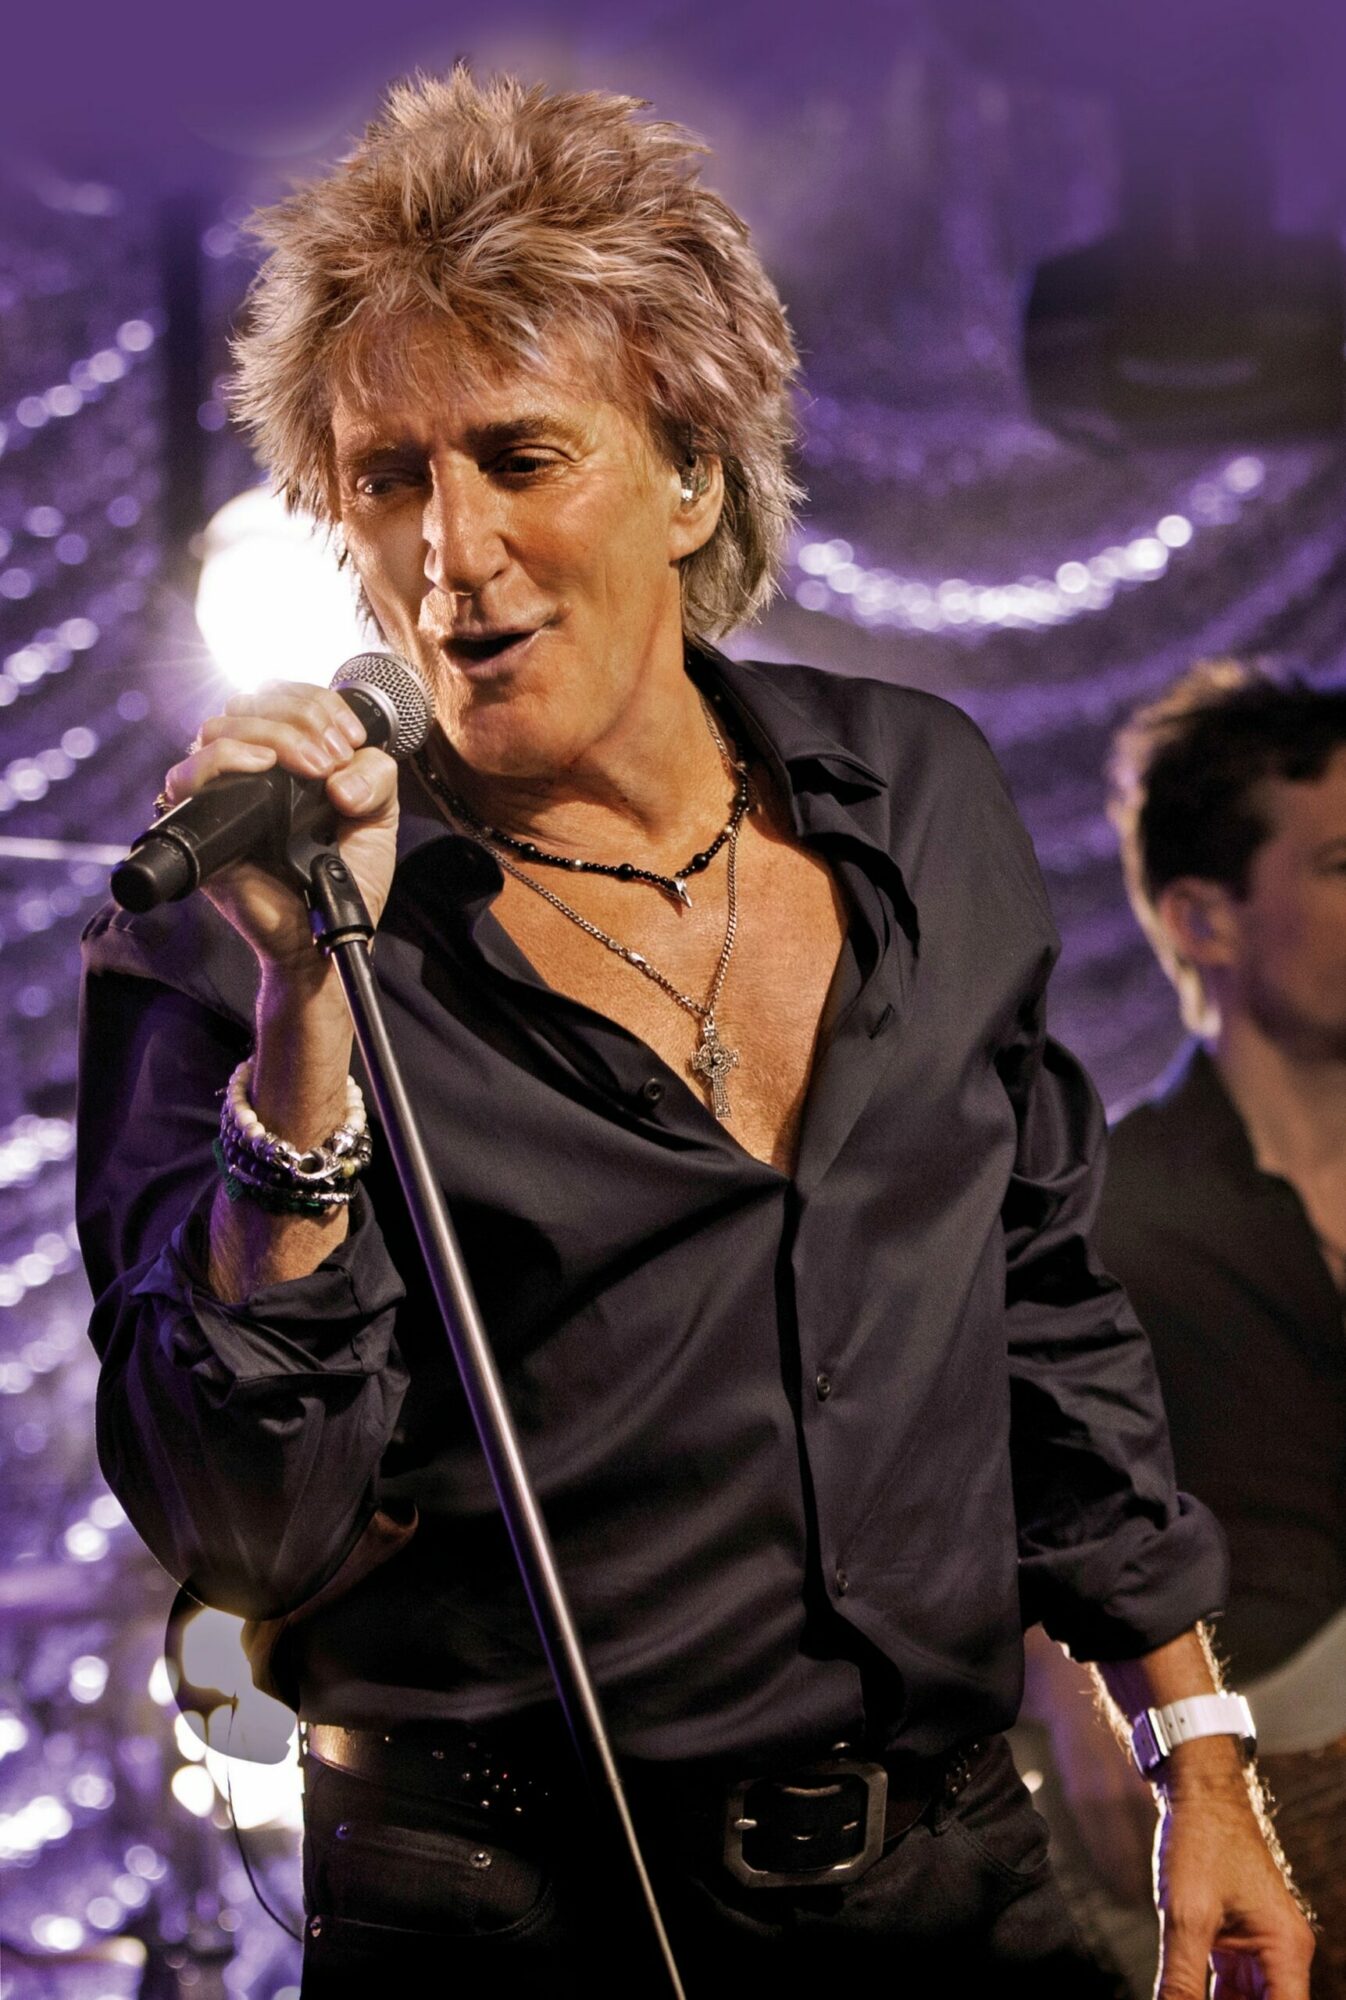 Image name Rod Stewart at Sewell Group Craven Park Stadium Hull scaled the 6 image from the post Rod Stewart with Special Guests Boy George & Culture Club at Sewell Group Craven Park Stadium, Hull in Yorkshire.com.